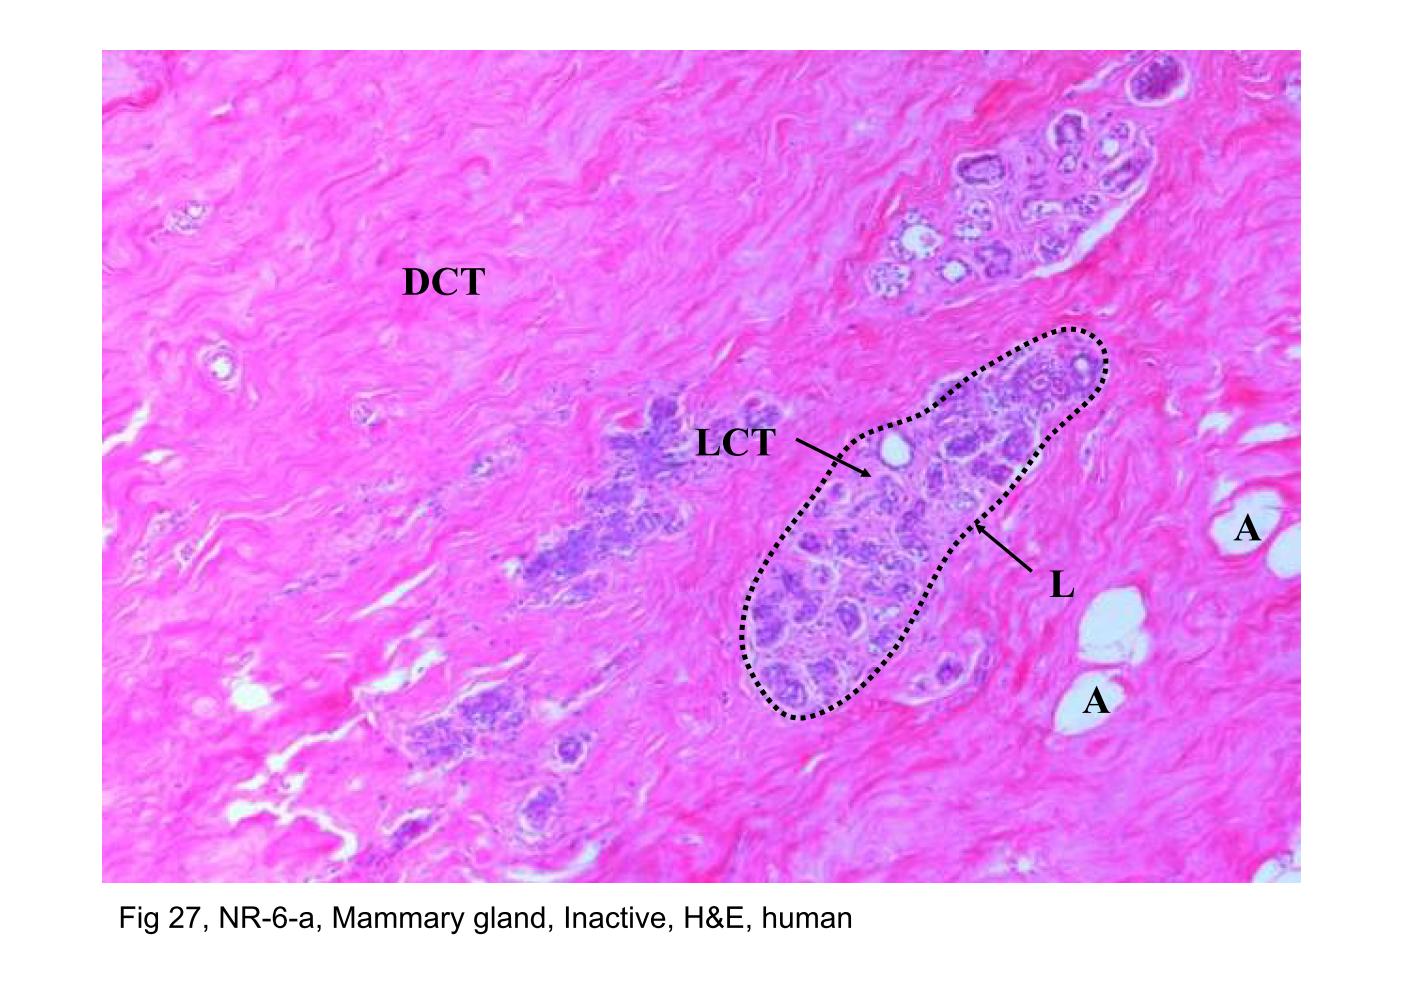 block14_53.jpg - Fig 27, NR-6-a, Mammary gland, Inactive, H&E, humanThis figure is a section through an inactive mammary gland. The  parenchyma is sparse and consists mainly of duct elements. The  ducts are surrounded by a loose connective tissue (LCT), and  together, the ducts and surrounding connective tissue constitute a  lobule (L). Beyond the lobule, the connective tissue is the dense  connective tissue (DCT). Characteristically, the dense connective  tissue contains numerous aggregates of adipocytes (A).